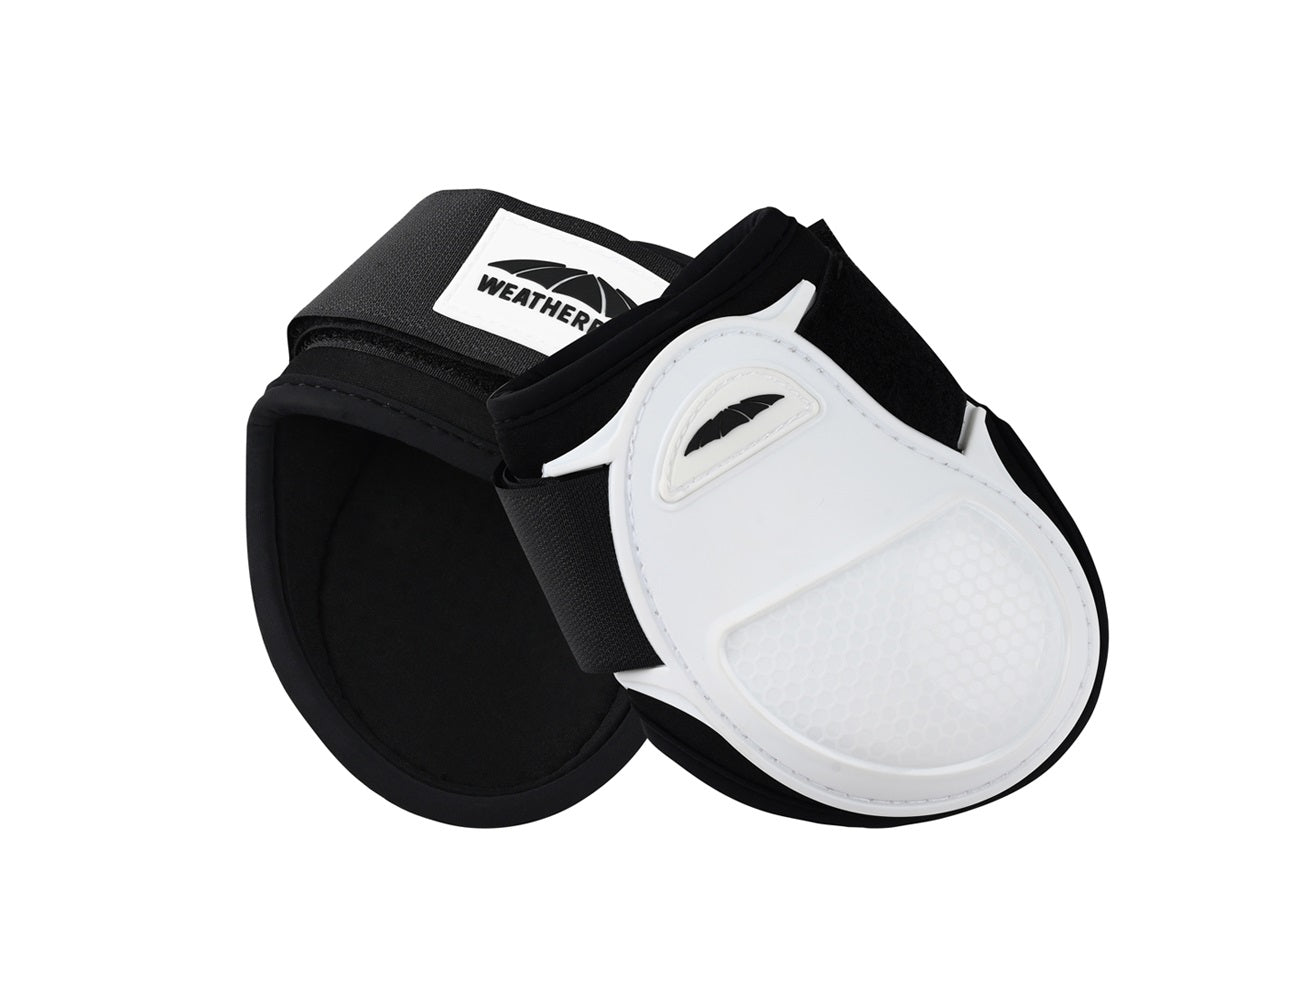 1018851000-white_wb-pro-luxe-touchtape-fetlock-boots_image_hero_null.jpg